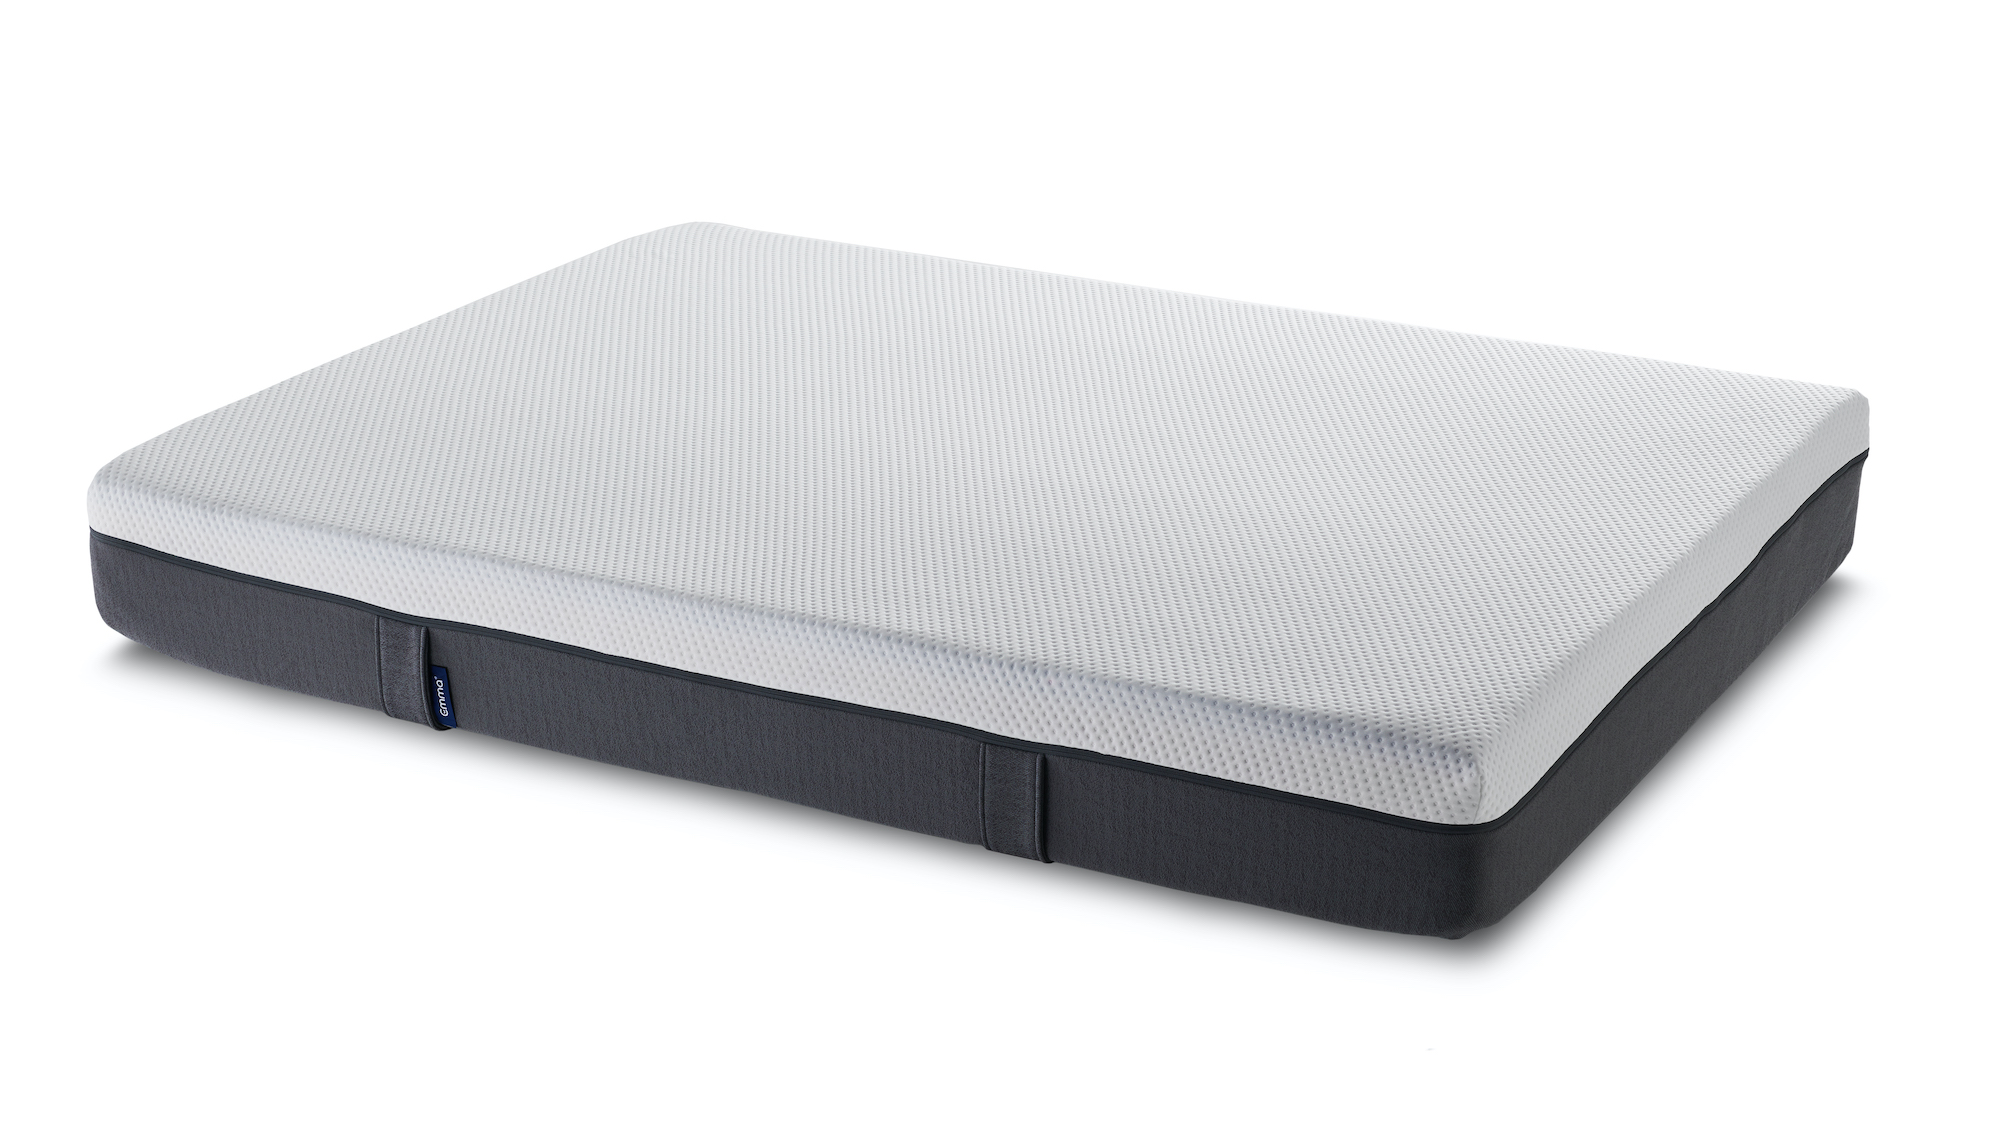 Memory foam vs hybrid mattresses: The Emma Original shown with a dark grey base and white removable cover